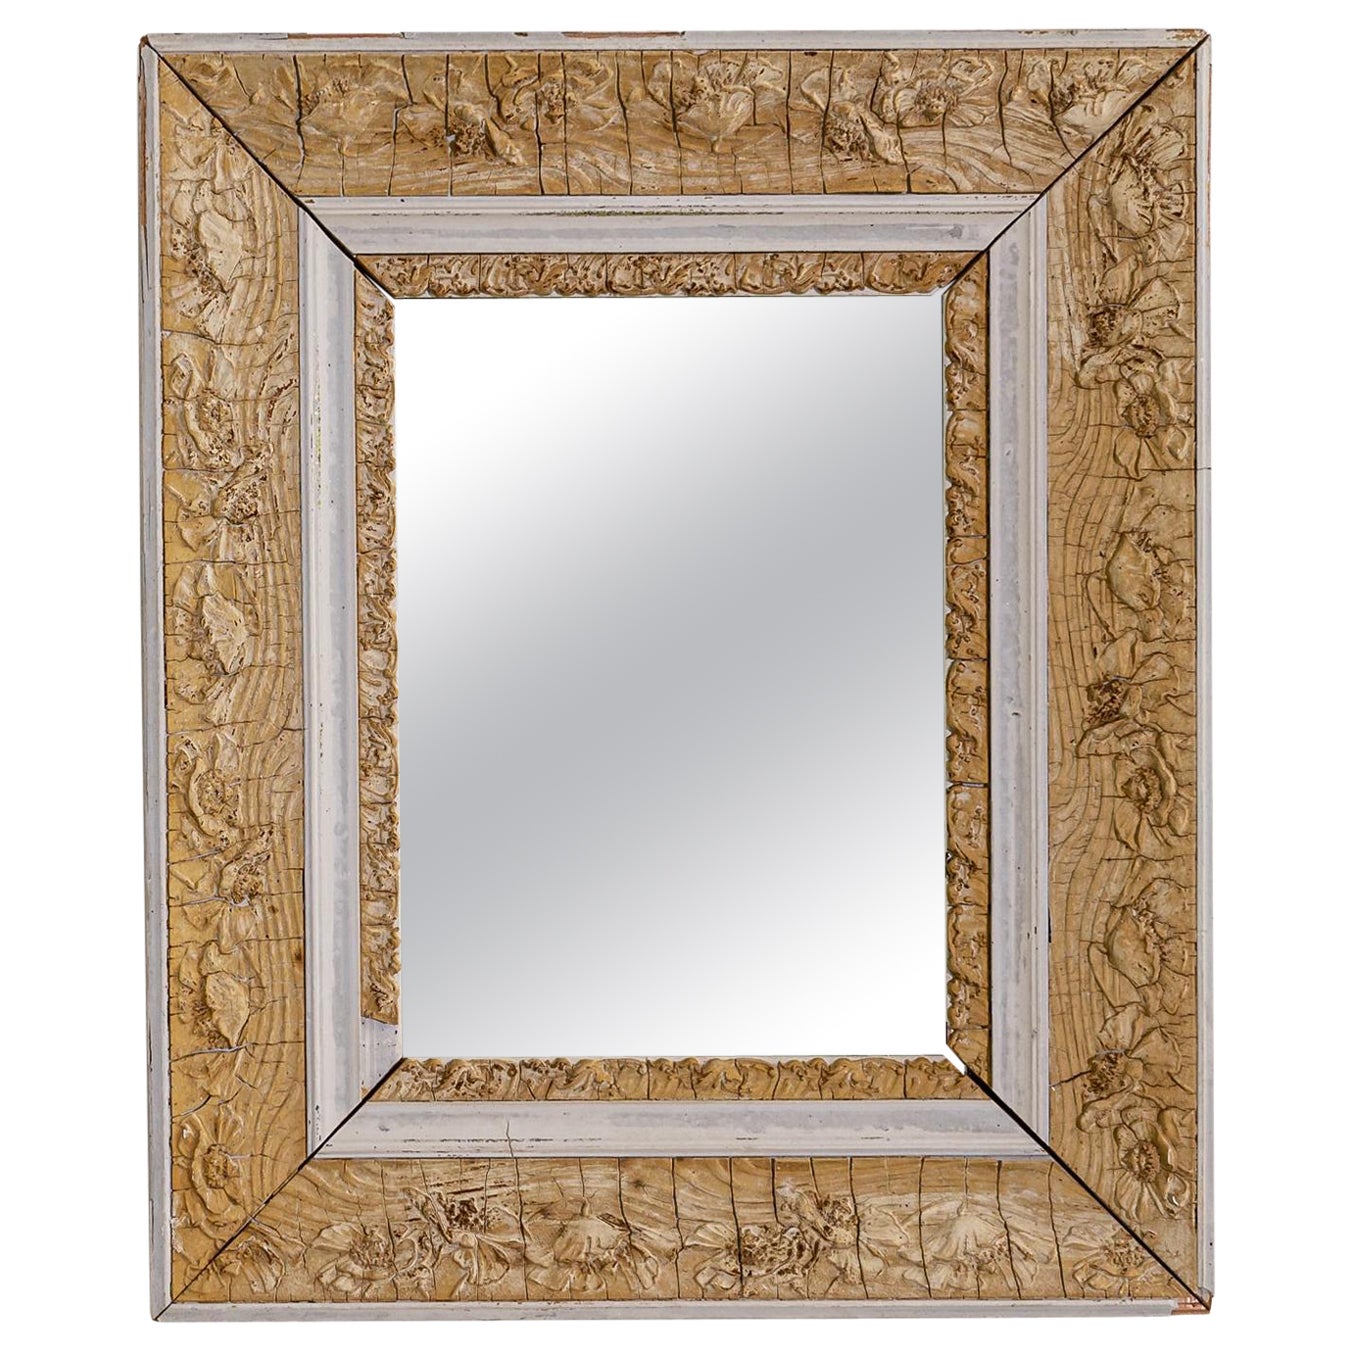 1900 French Wooden Mirror For Sale